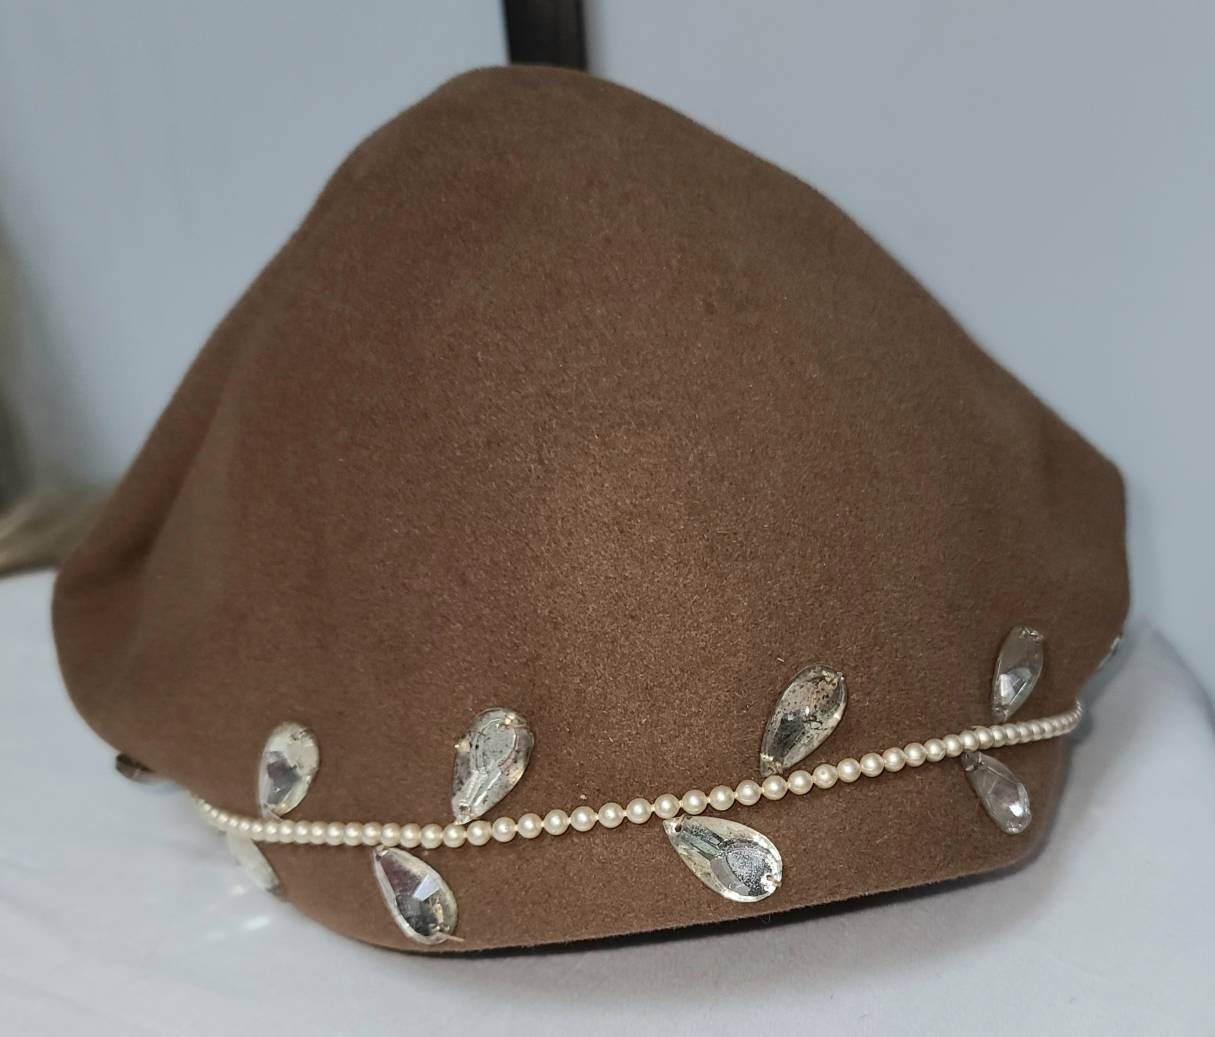 Vintage Sculptural Hat 1940s 50s Tan Wool Pointed Cocktail Hat Tiny Pearl Trim Teardrop Ornaments Rockabilly 22 in.